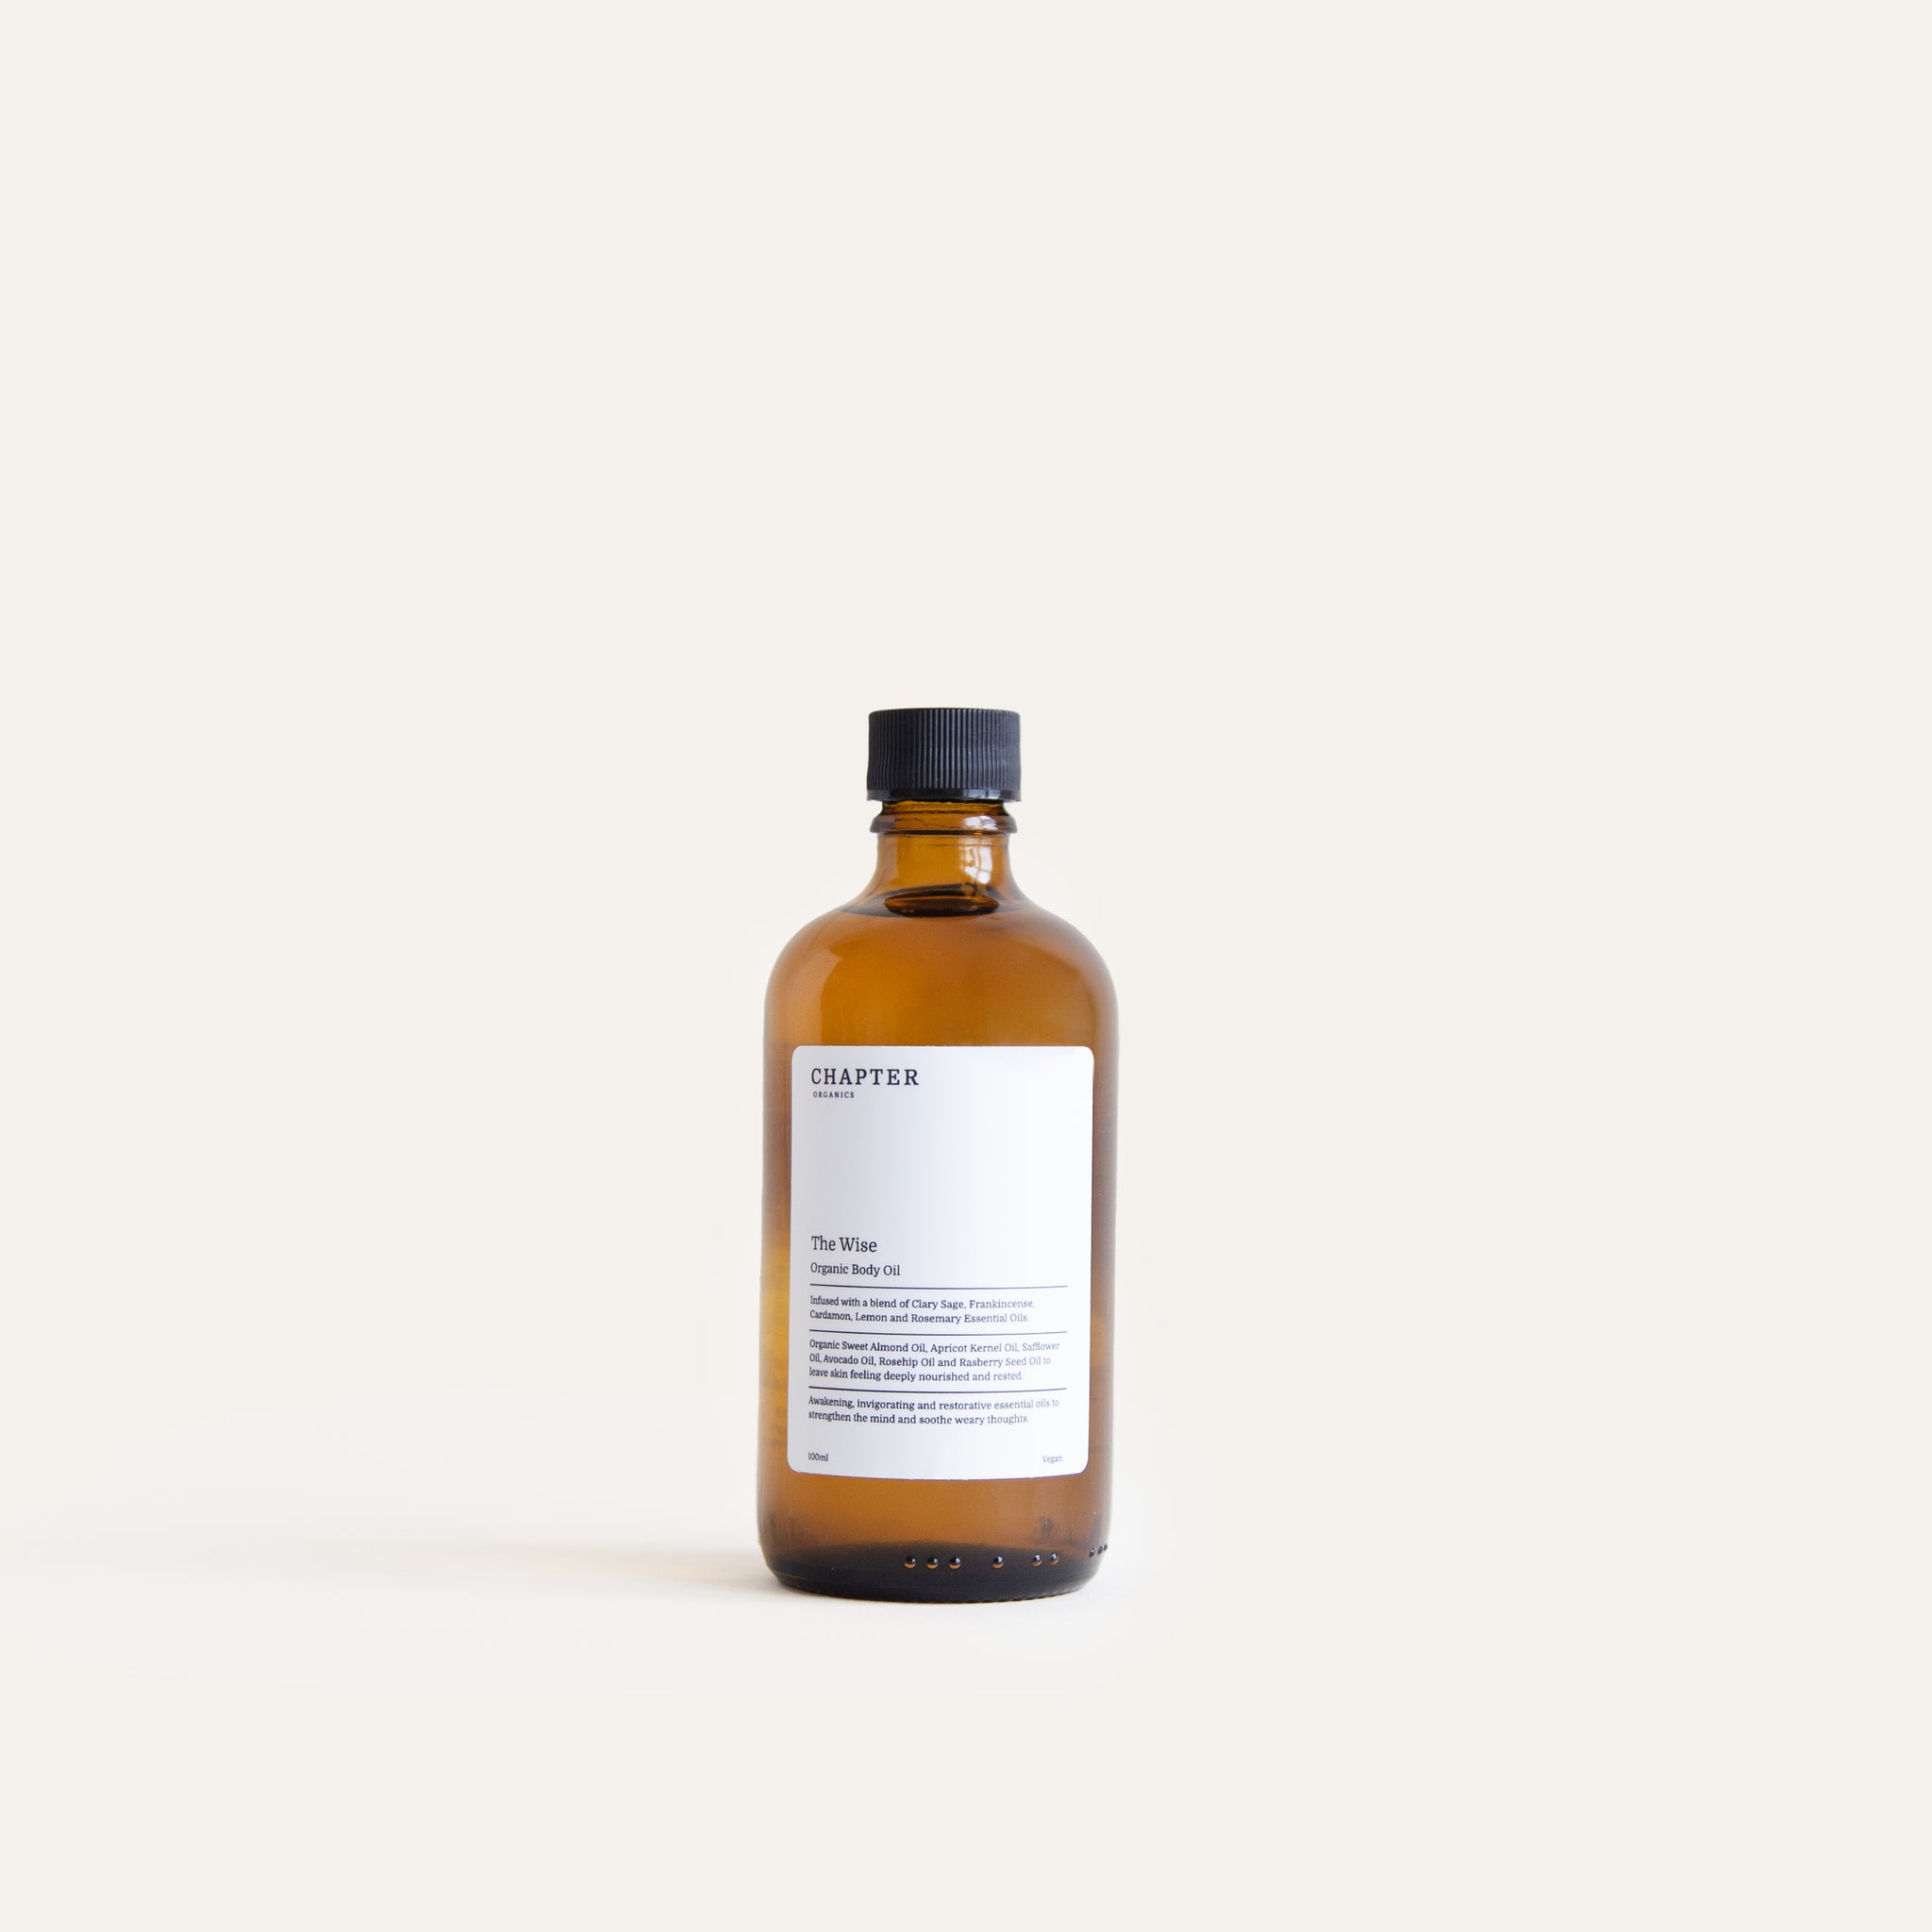 The Wise Organic Body Oil